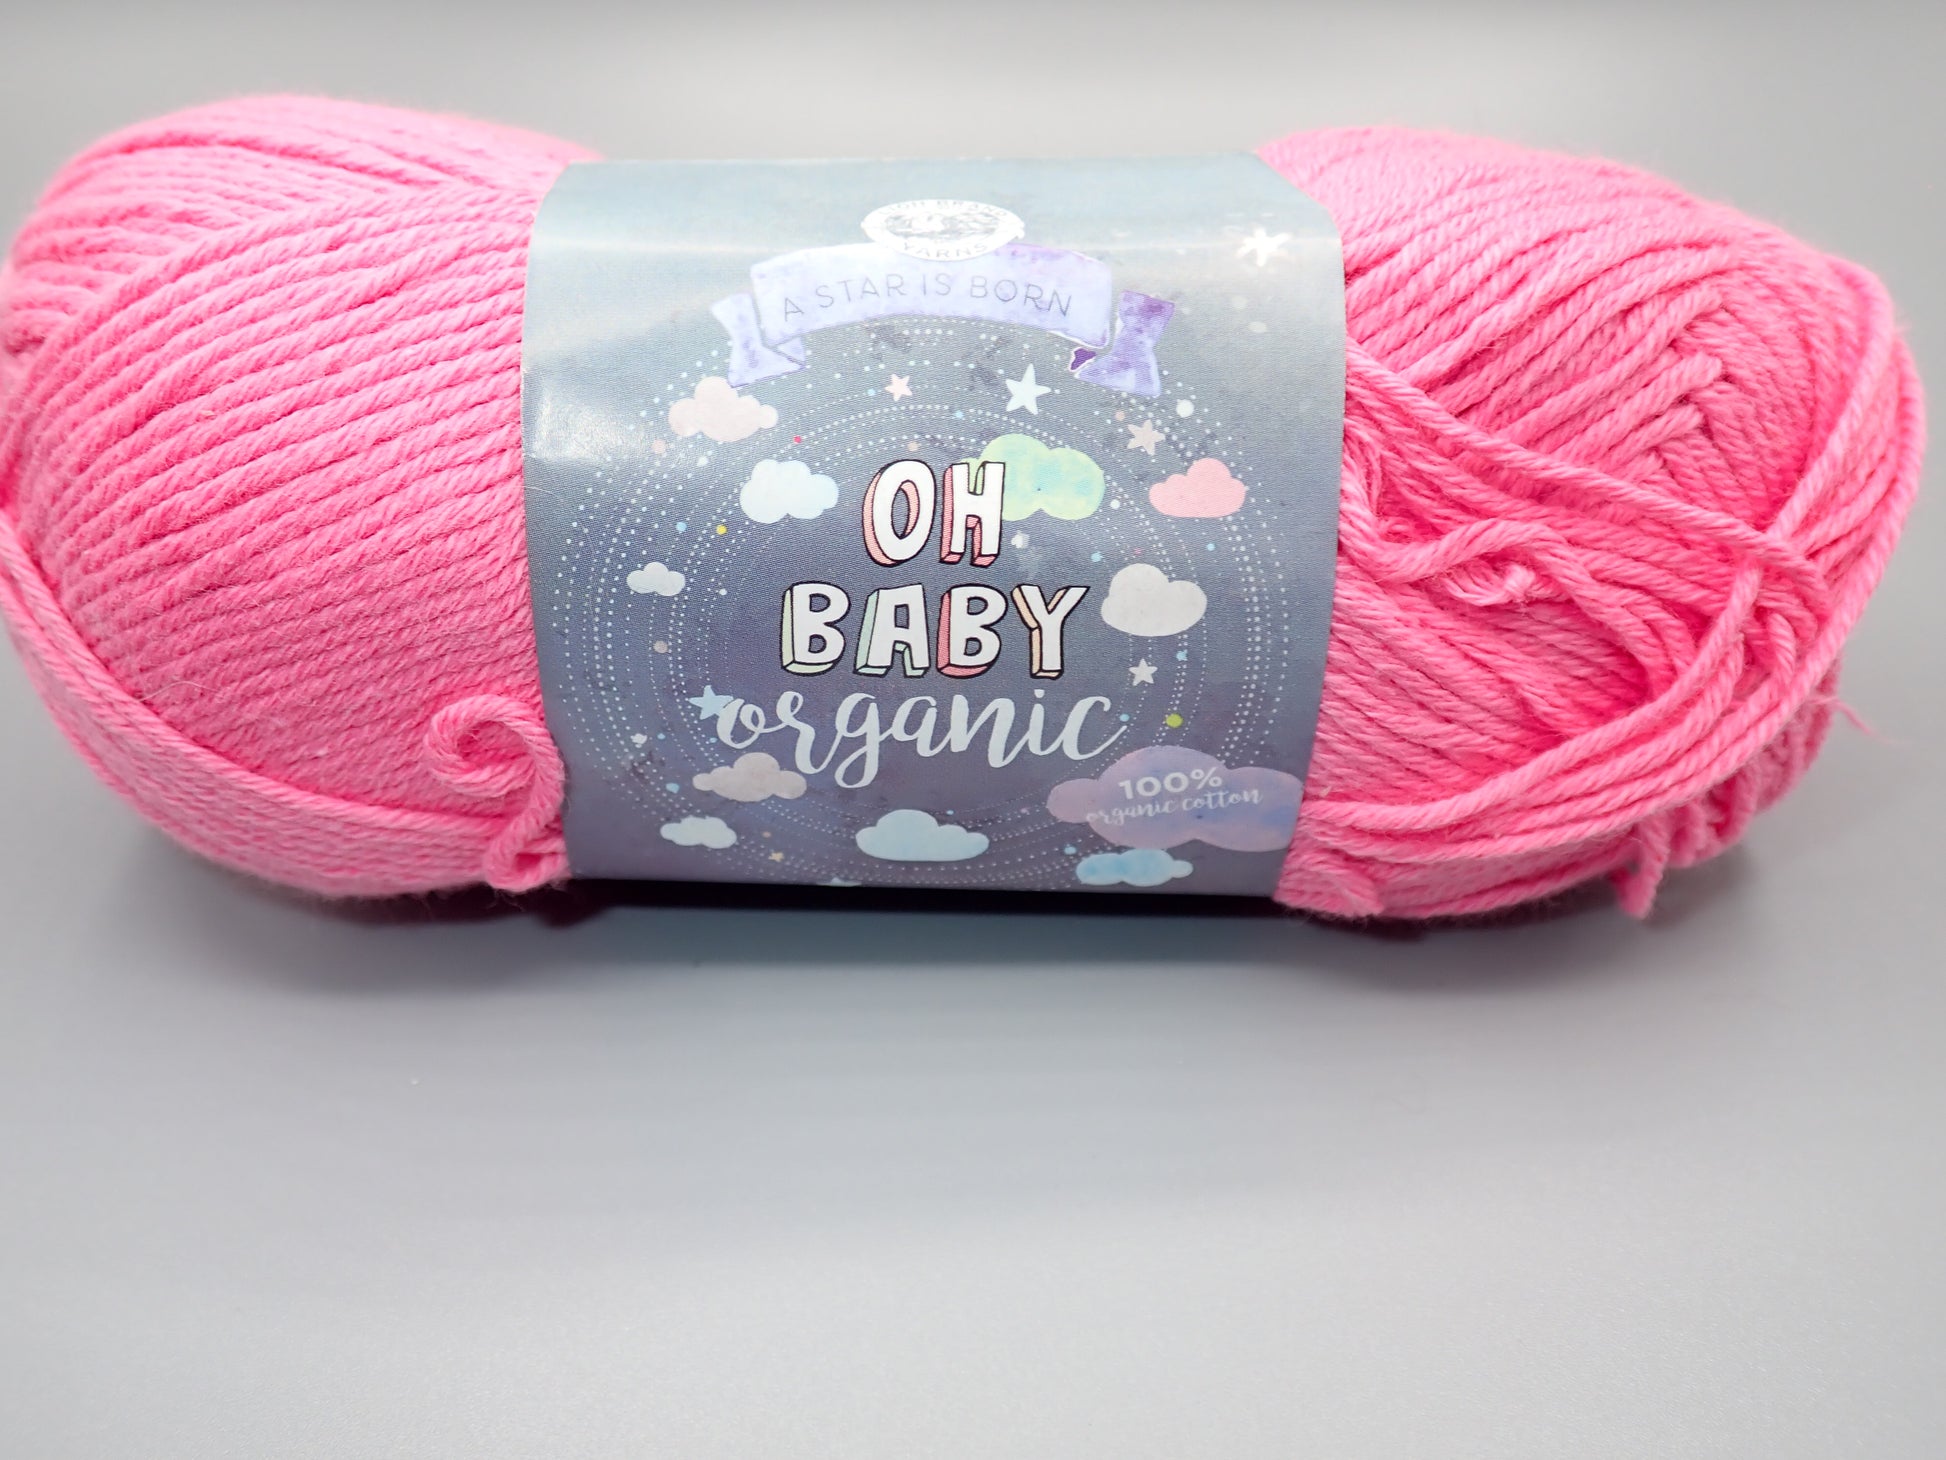 Lion Brand Yarns Sport weight Oh Baby Organic Pink